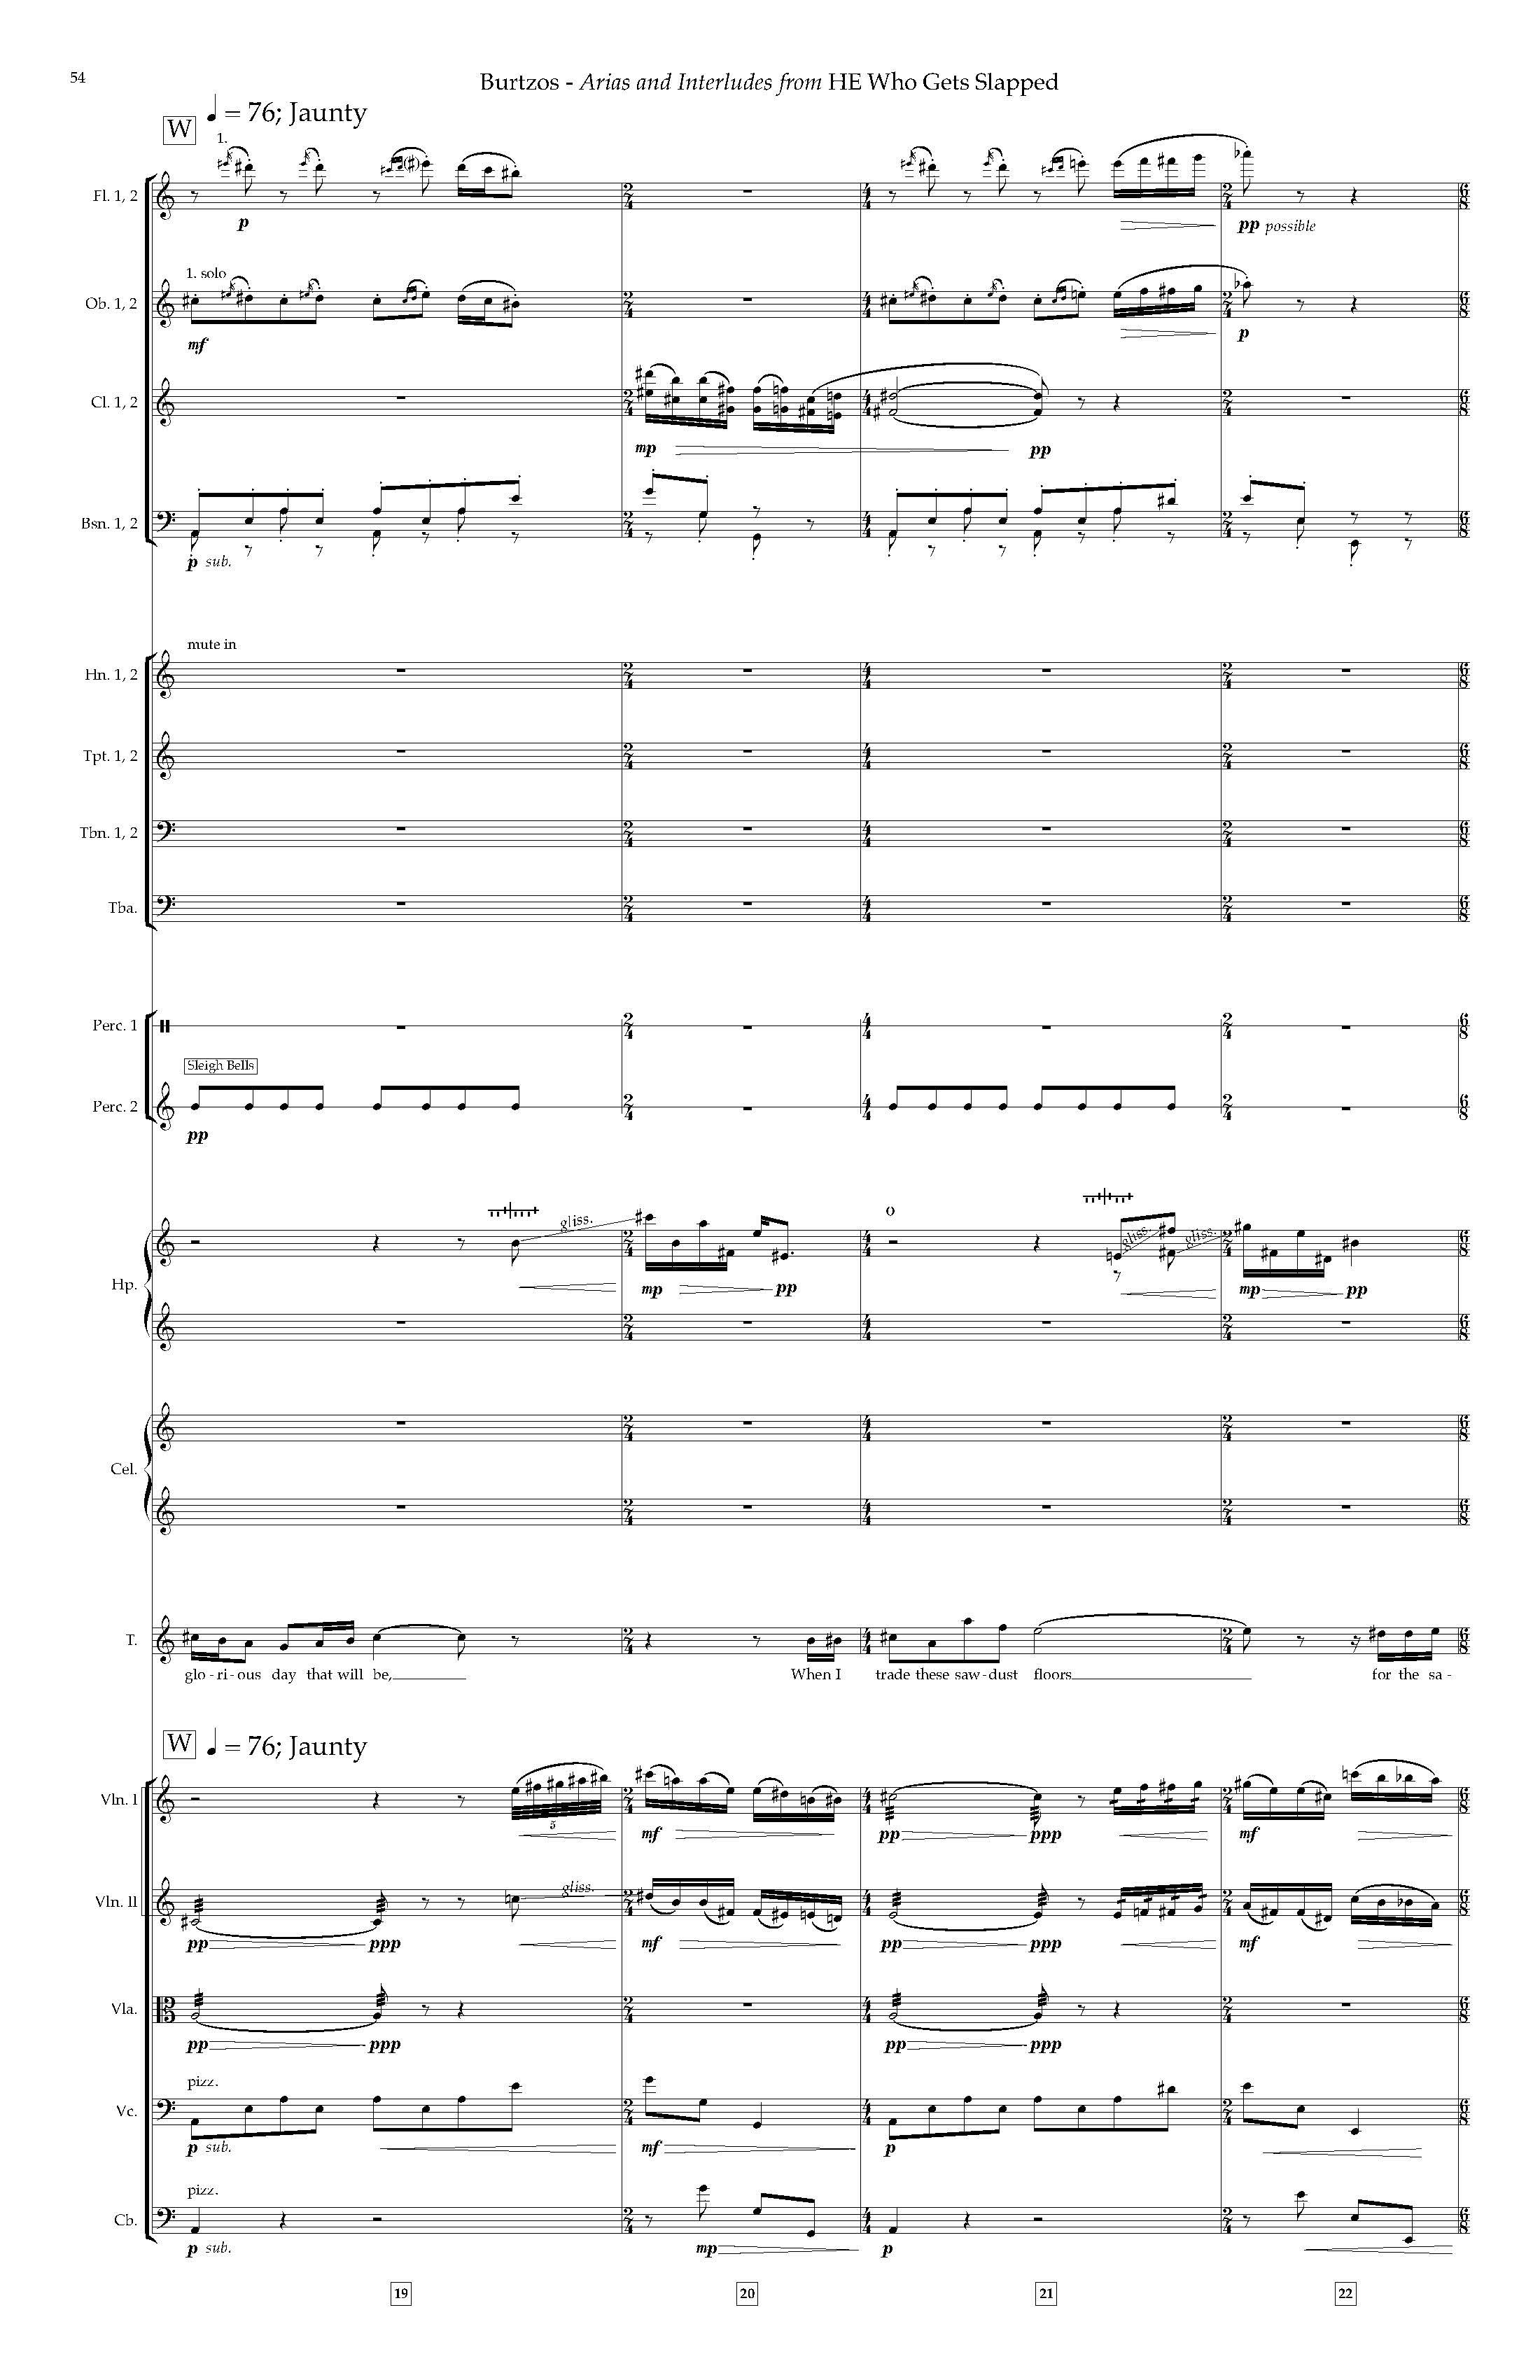 Arias and Interludes from HWGS - Complete Score_Page_60.jpg